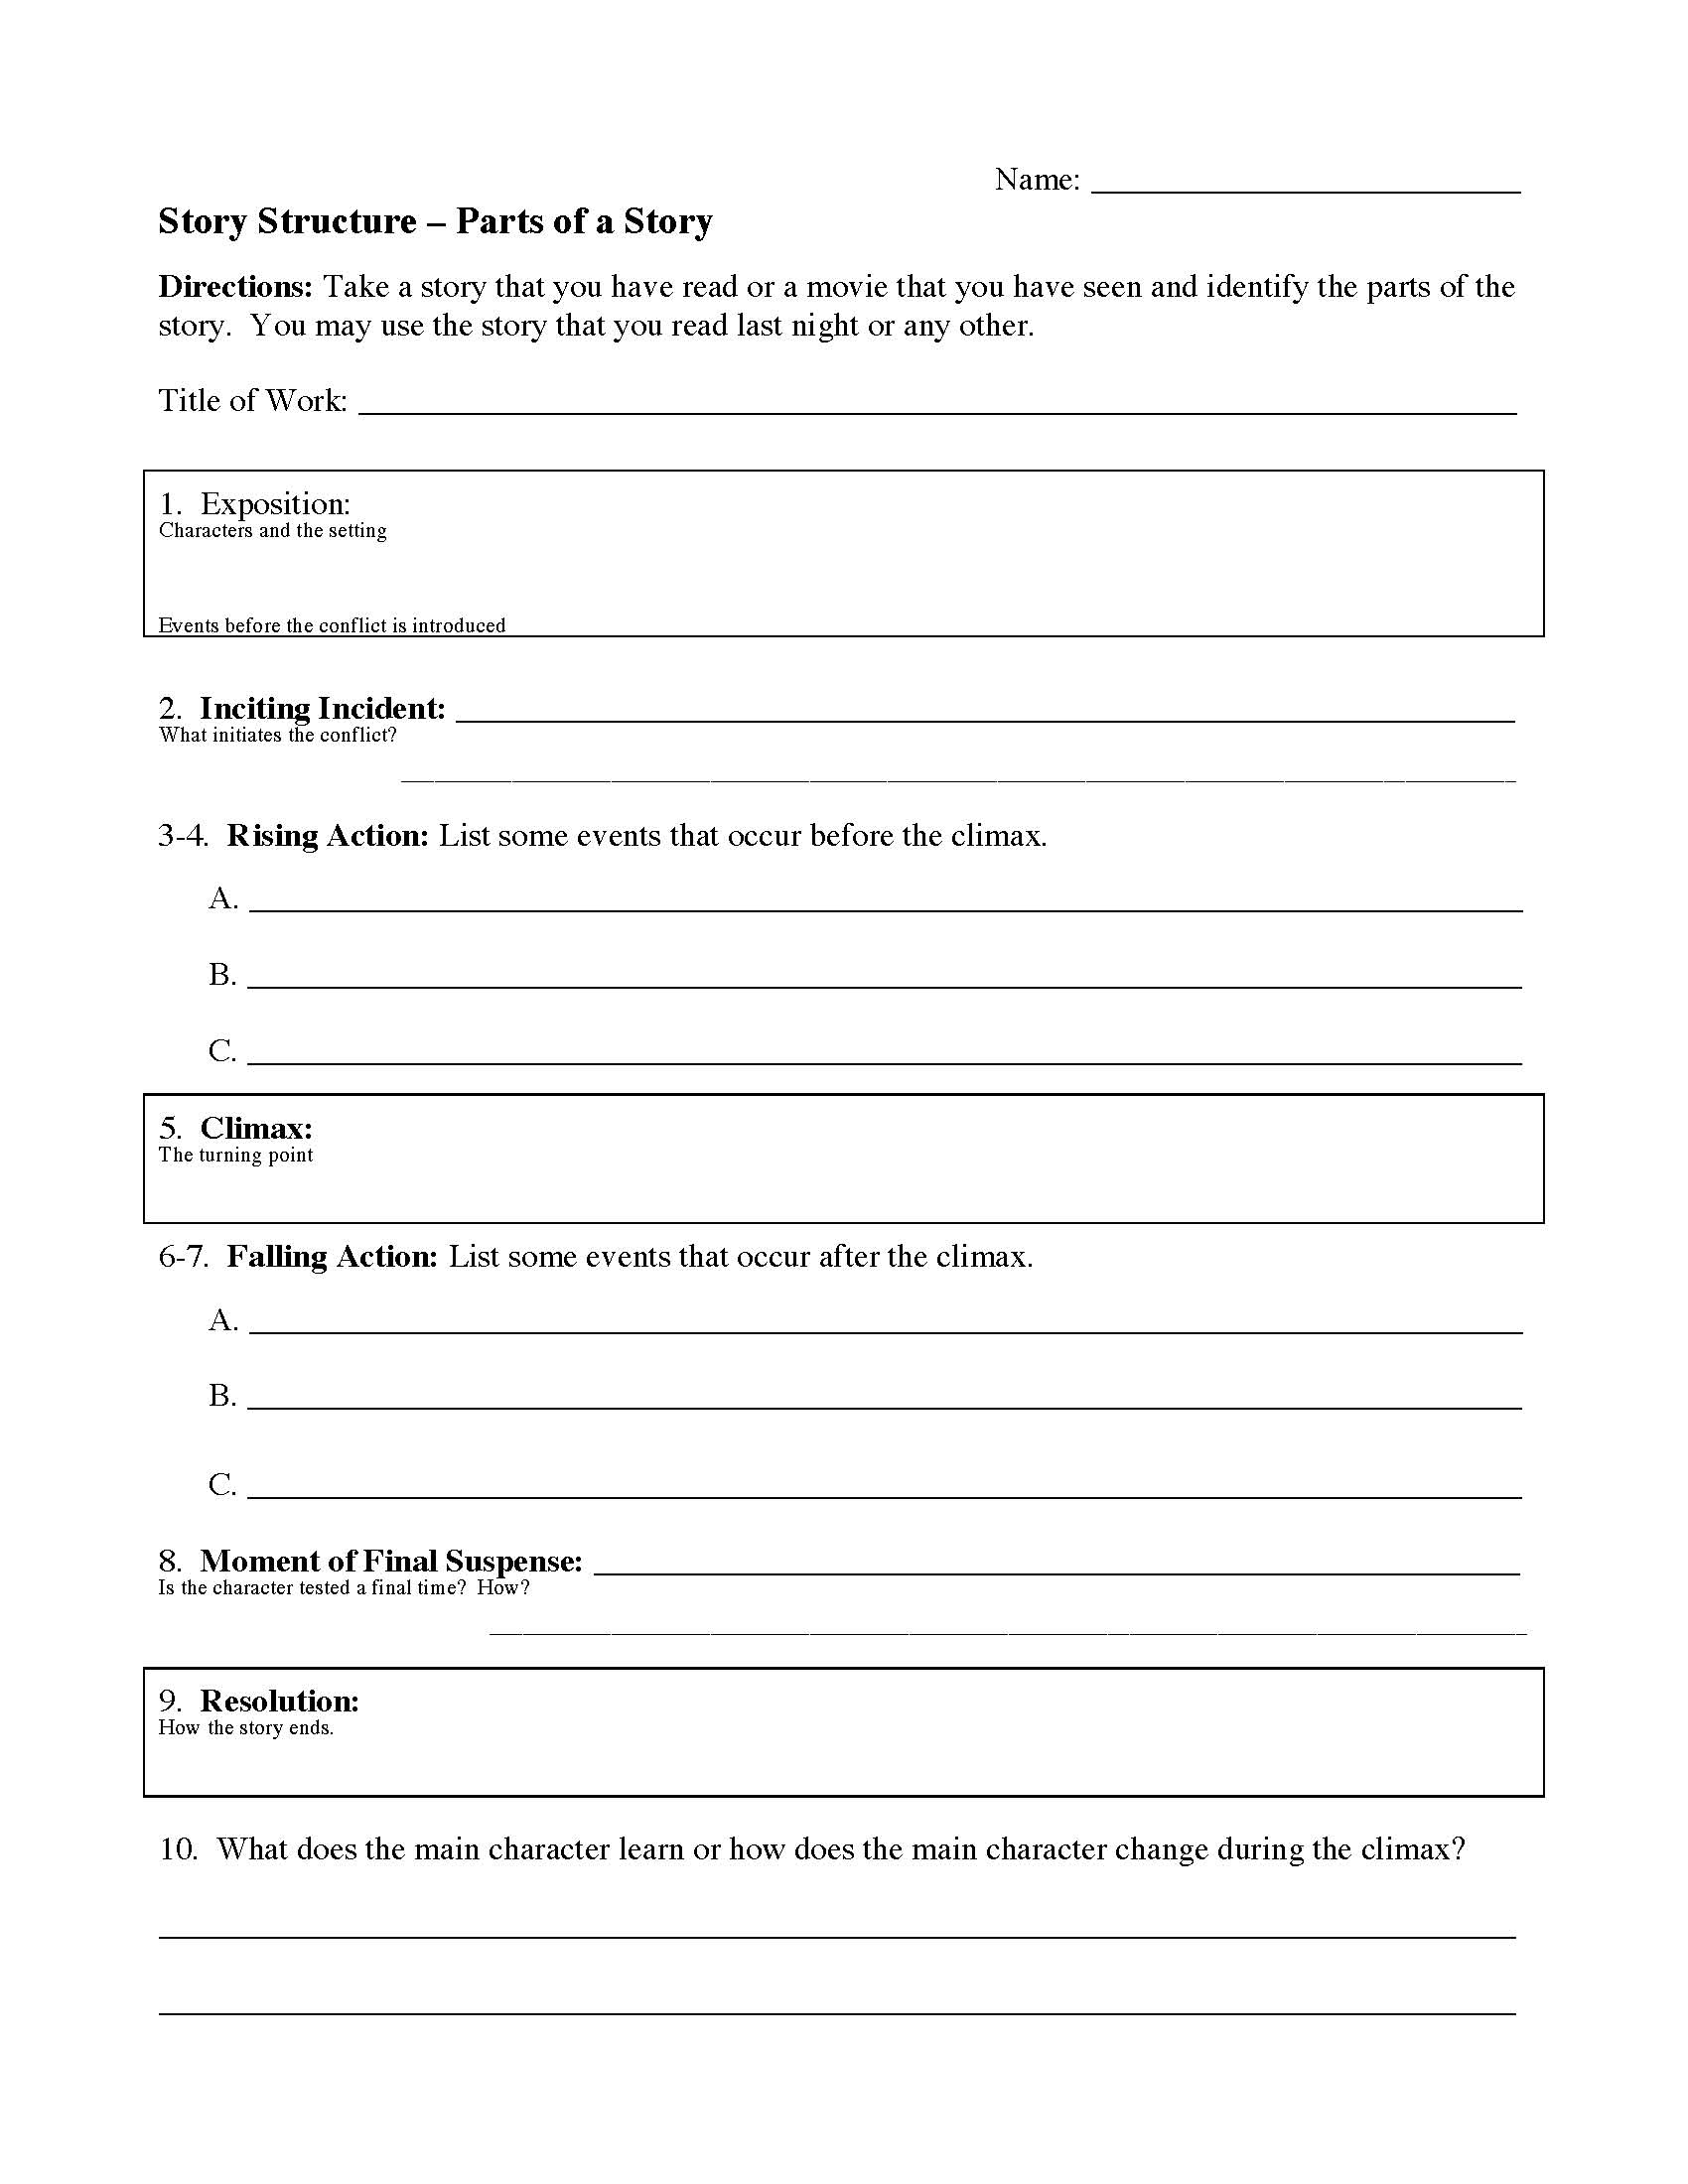 story-structure-worksheets-reading-activities